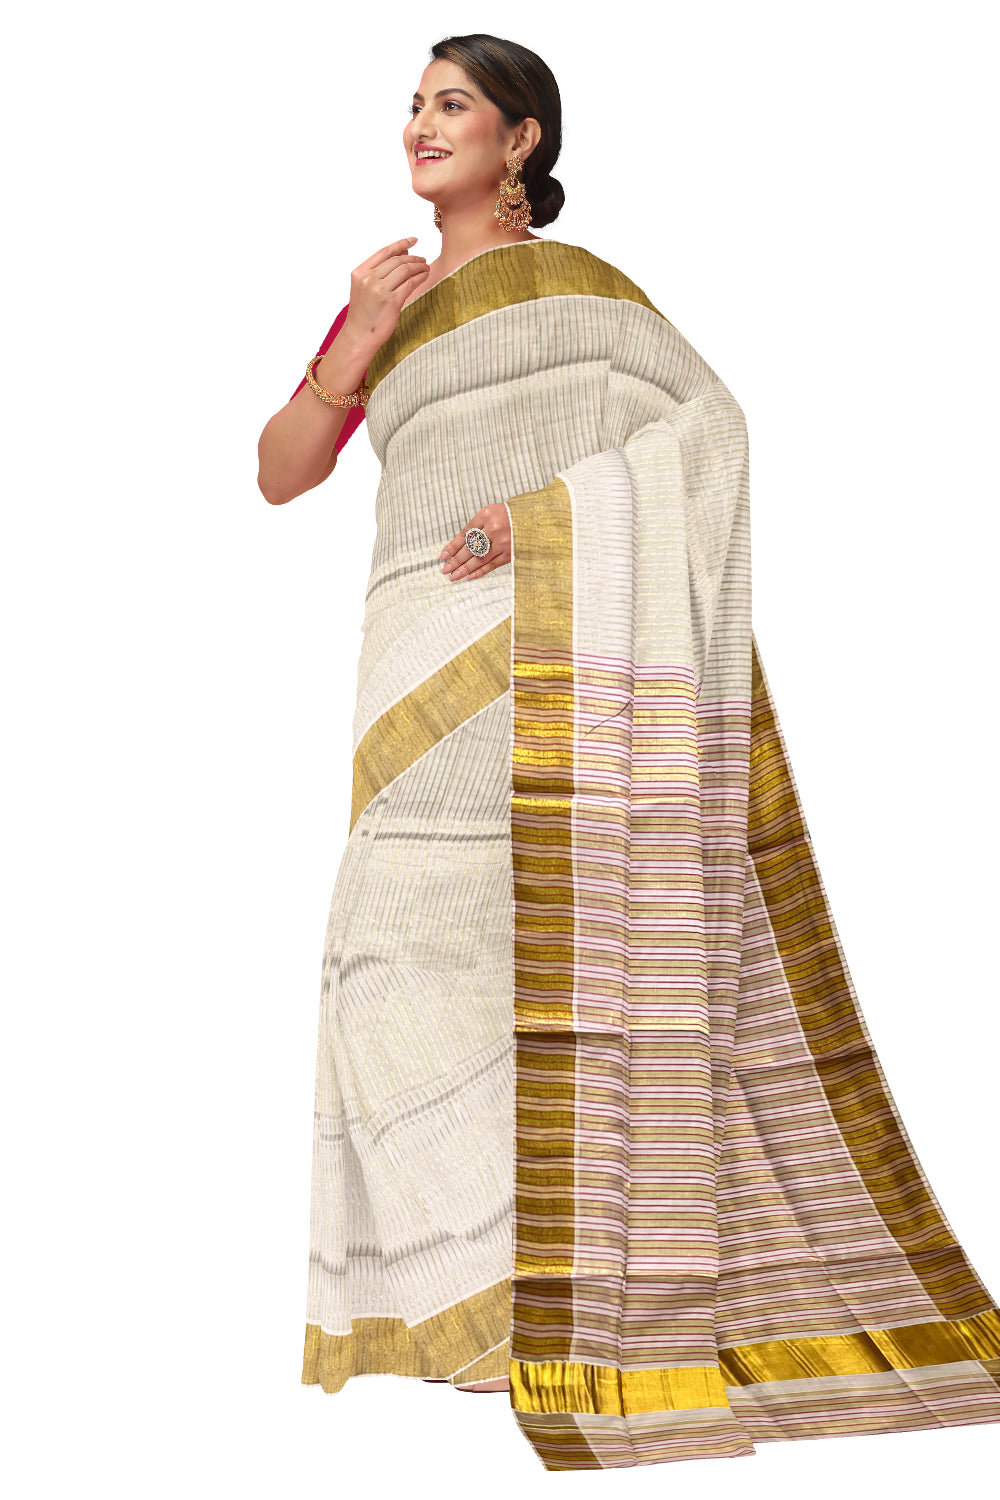 Pure Cotton Kerala Kasavu Saree with Lines Designs on Body and Red Lines on Munthani